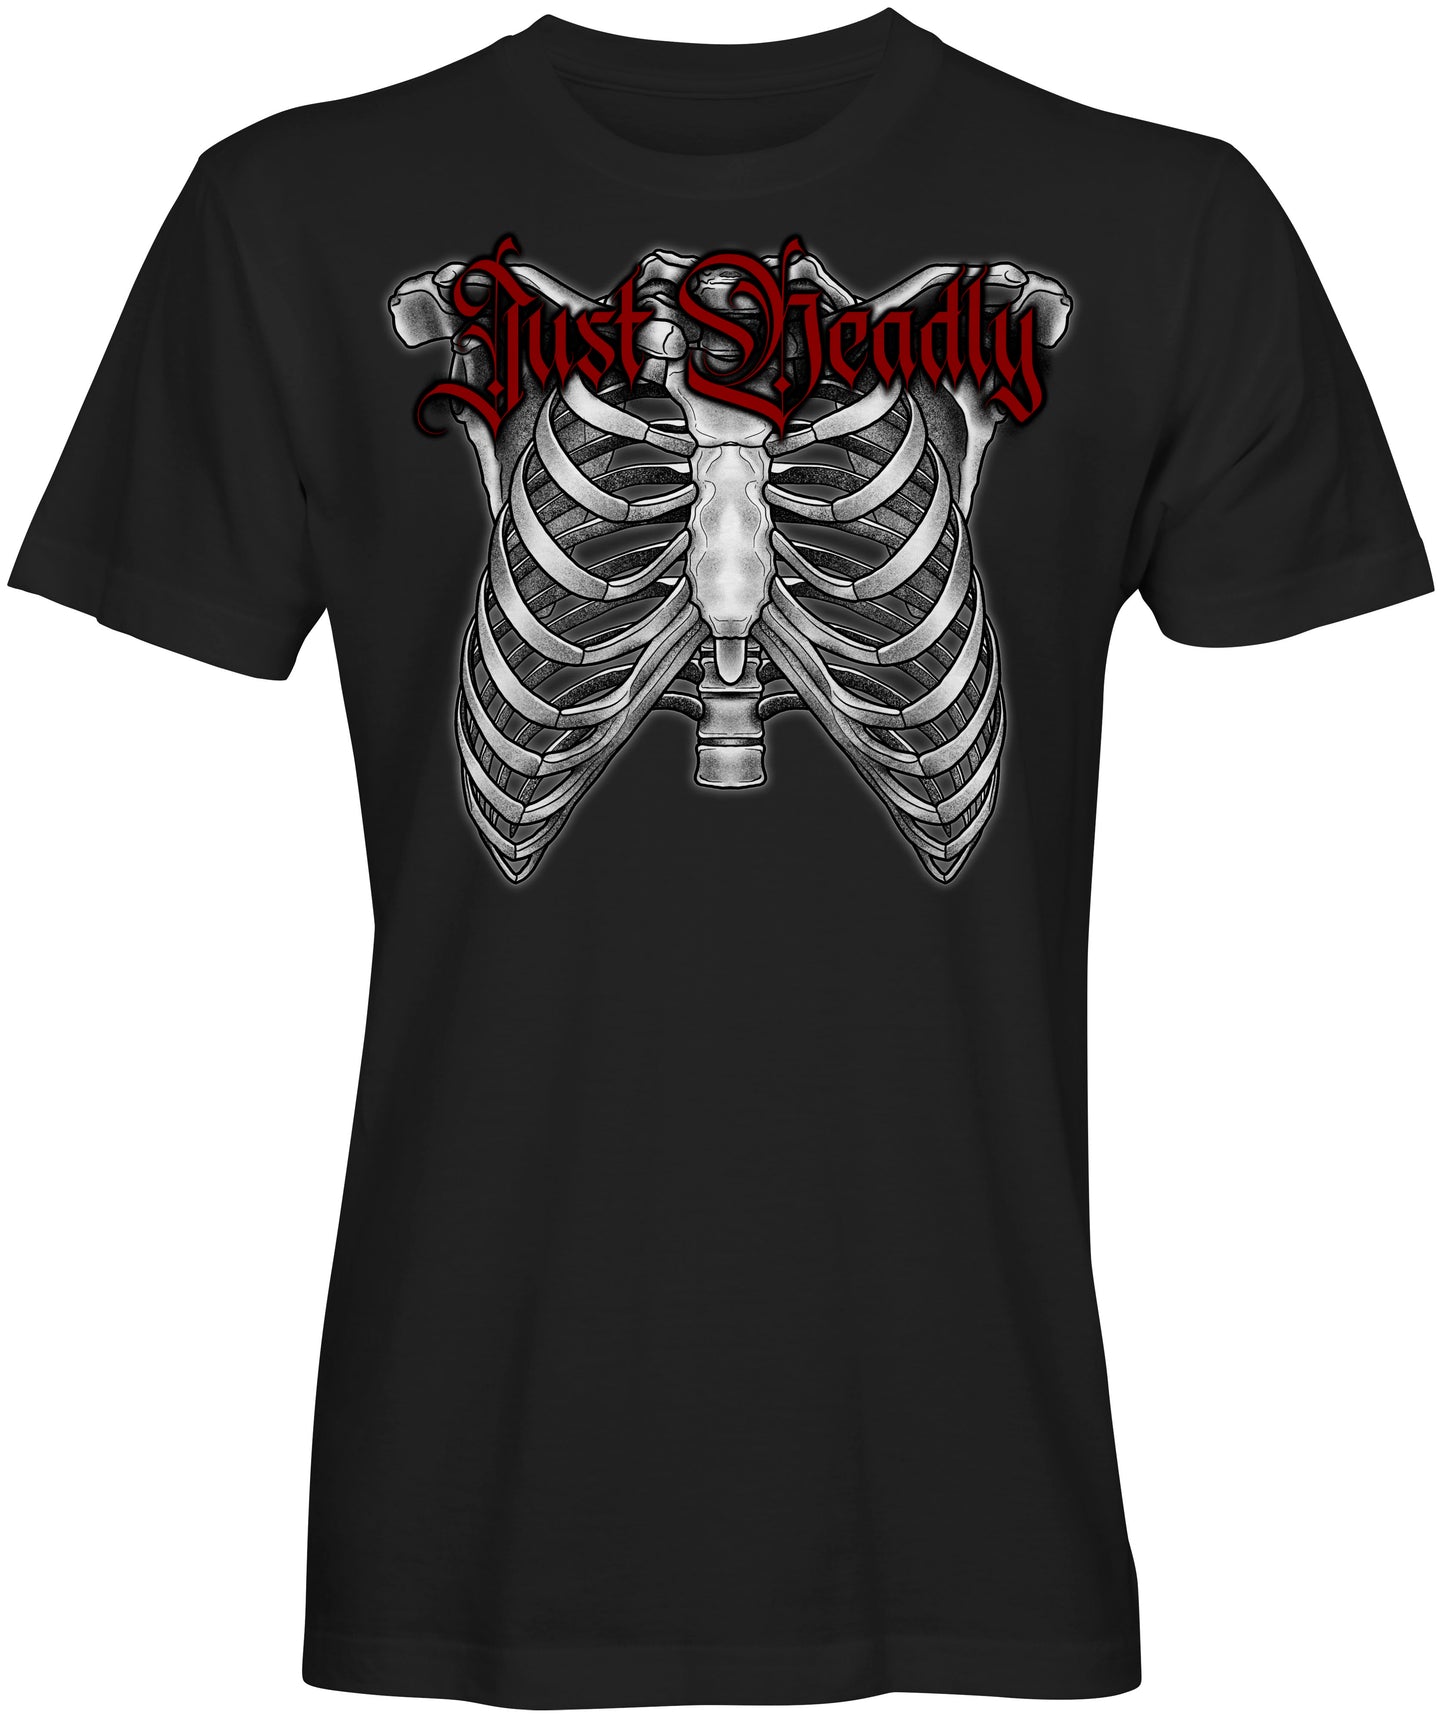 Just Deadly Rib Tee